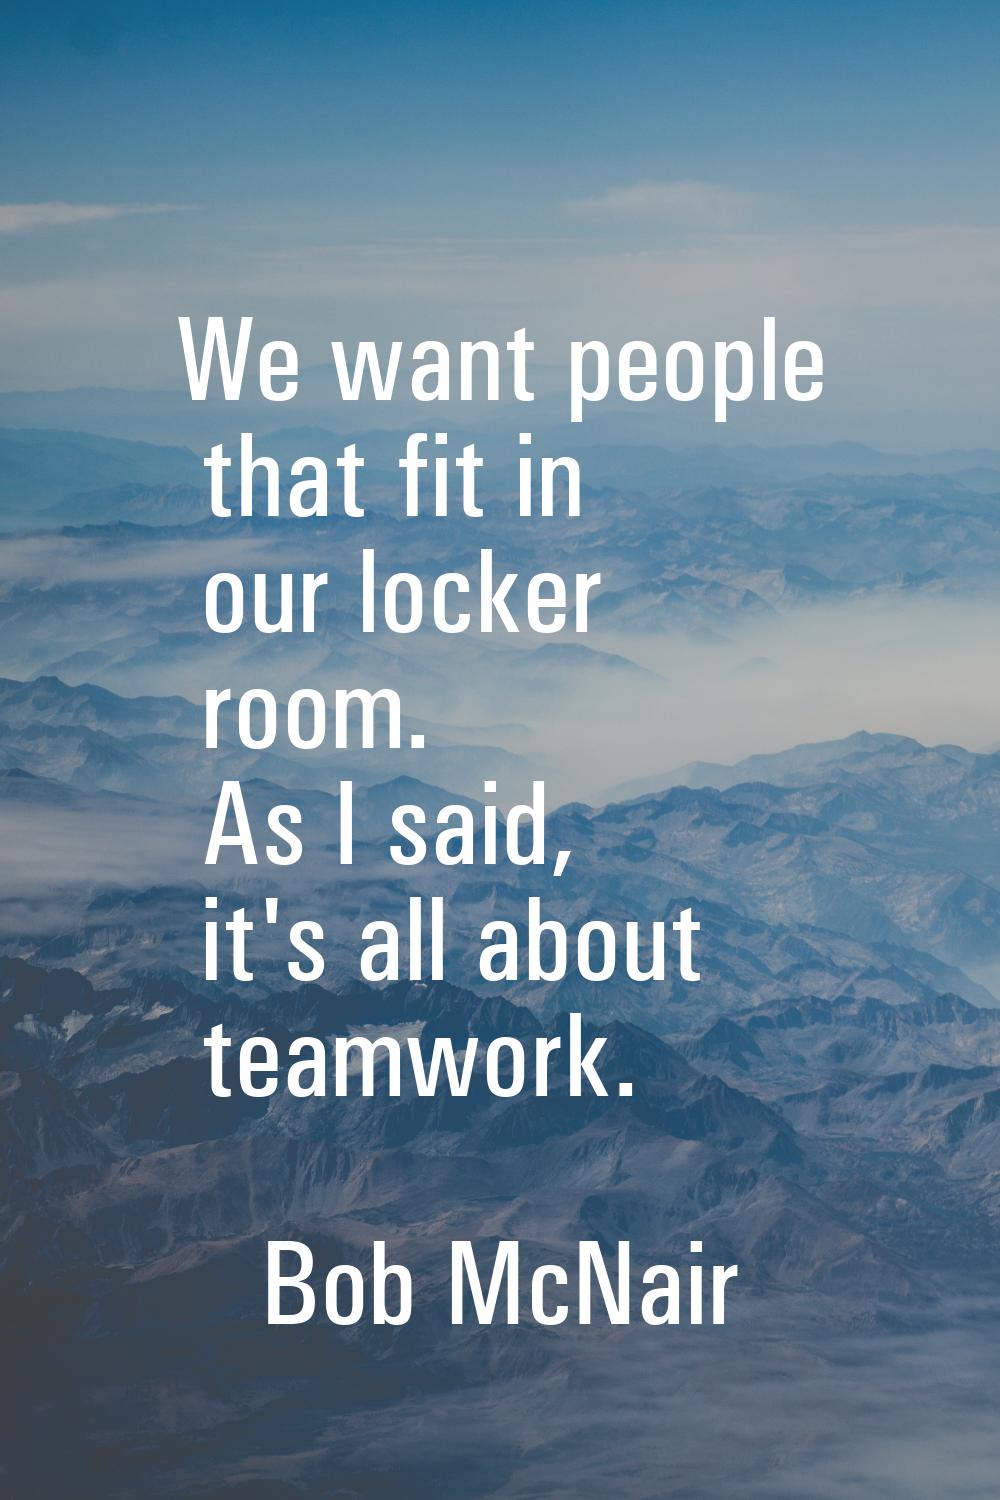 We want people that fit in our locker room. As I said, it's all about teamwork.